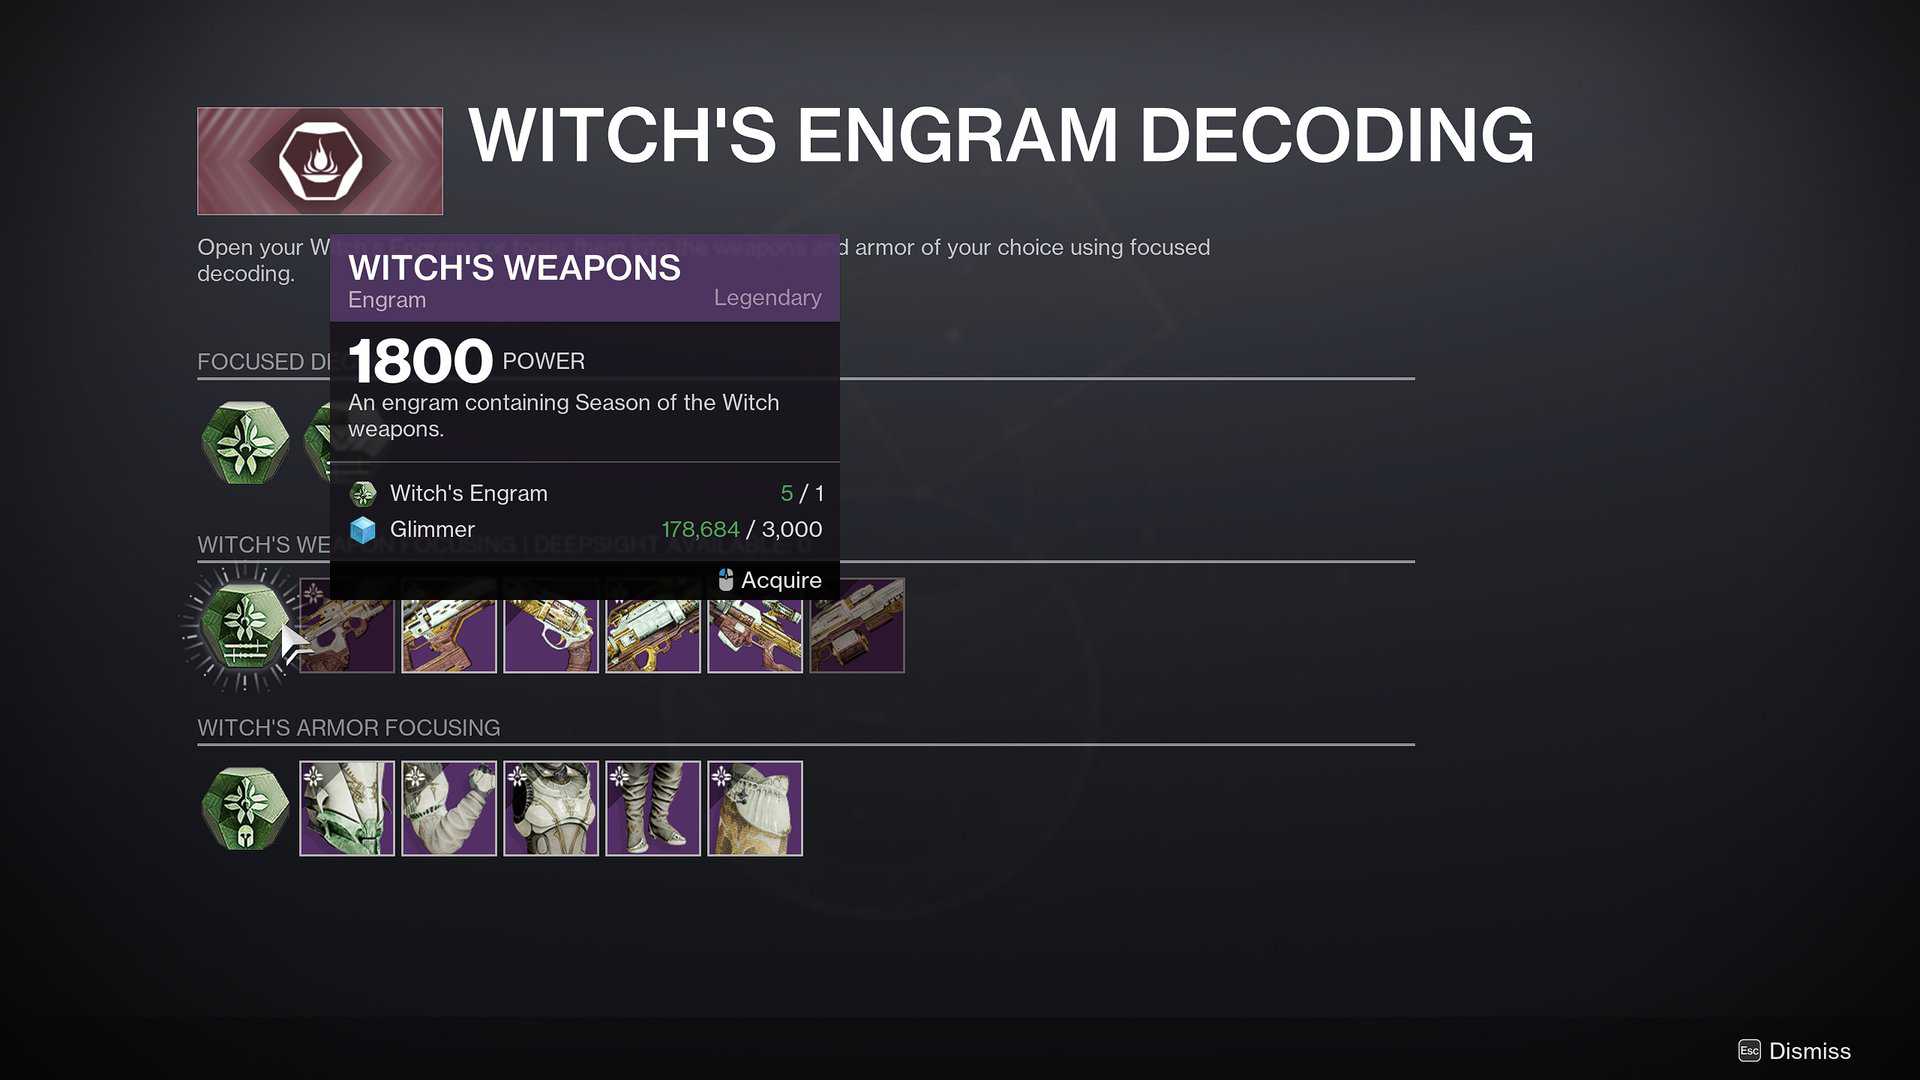 Witch weapons focusing screen